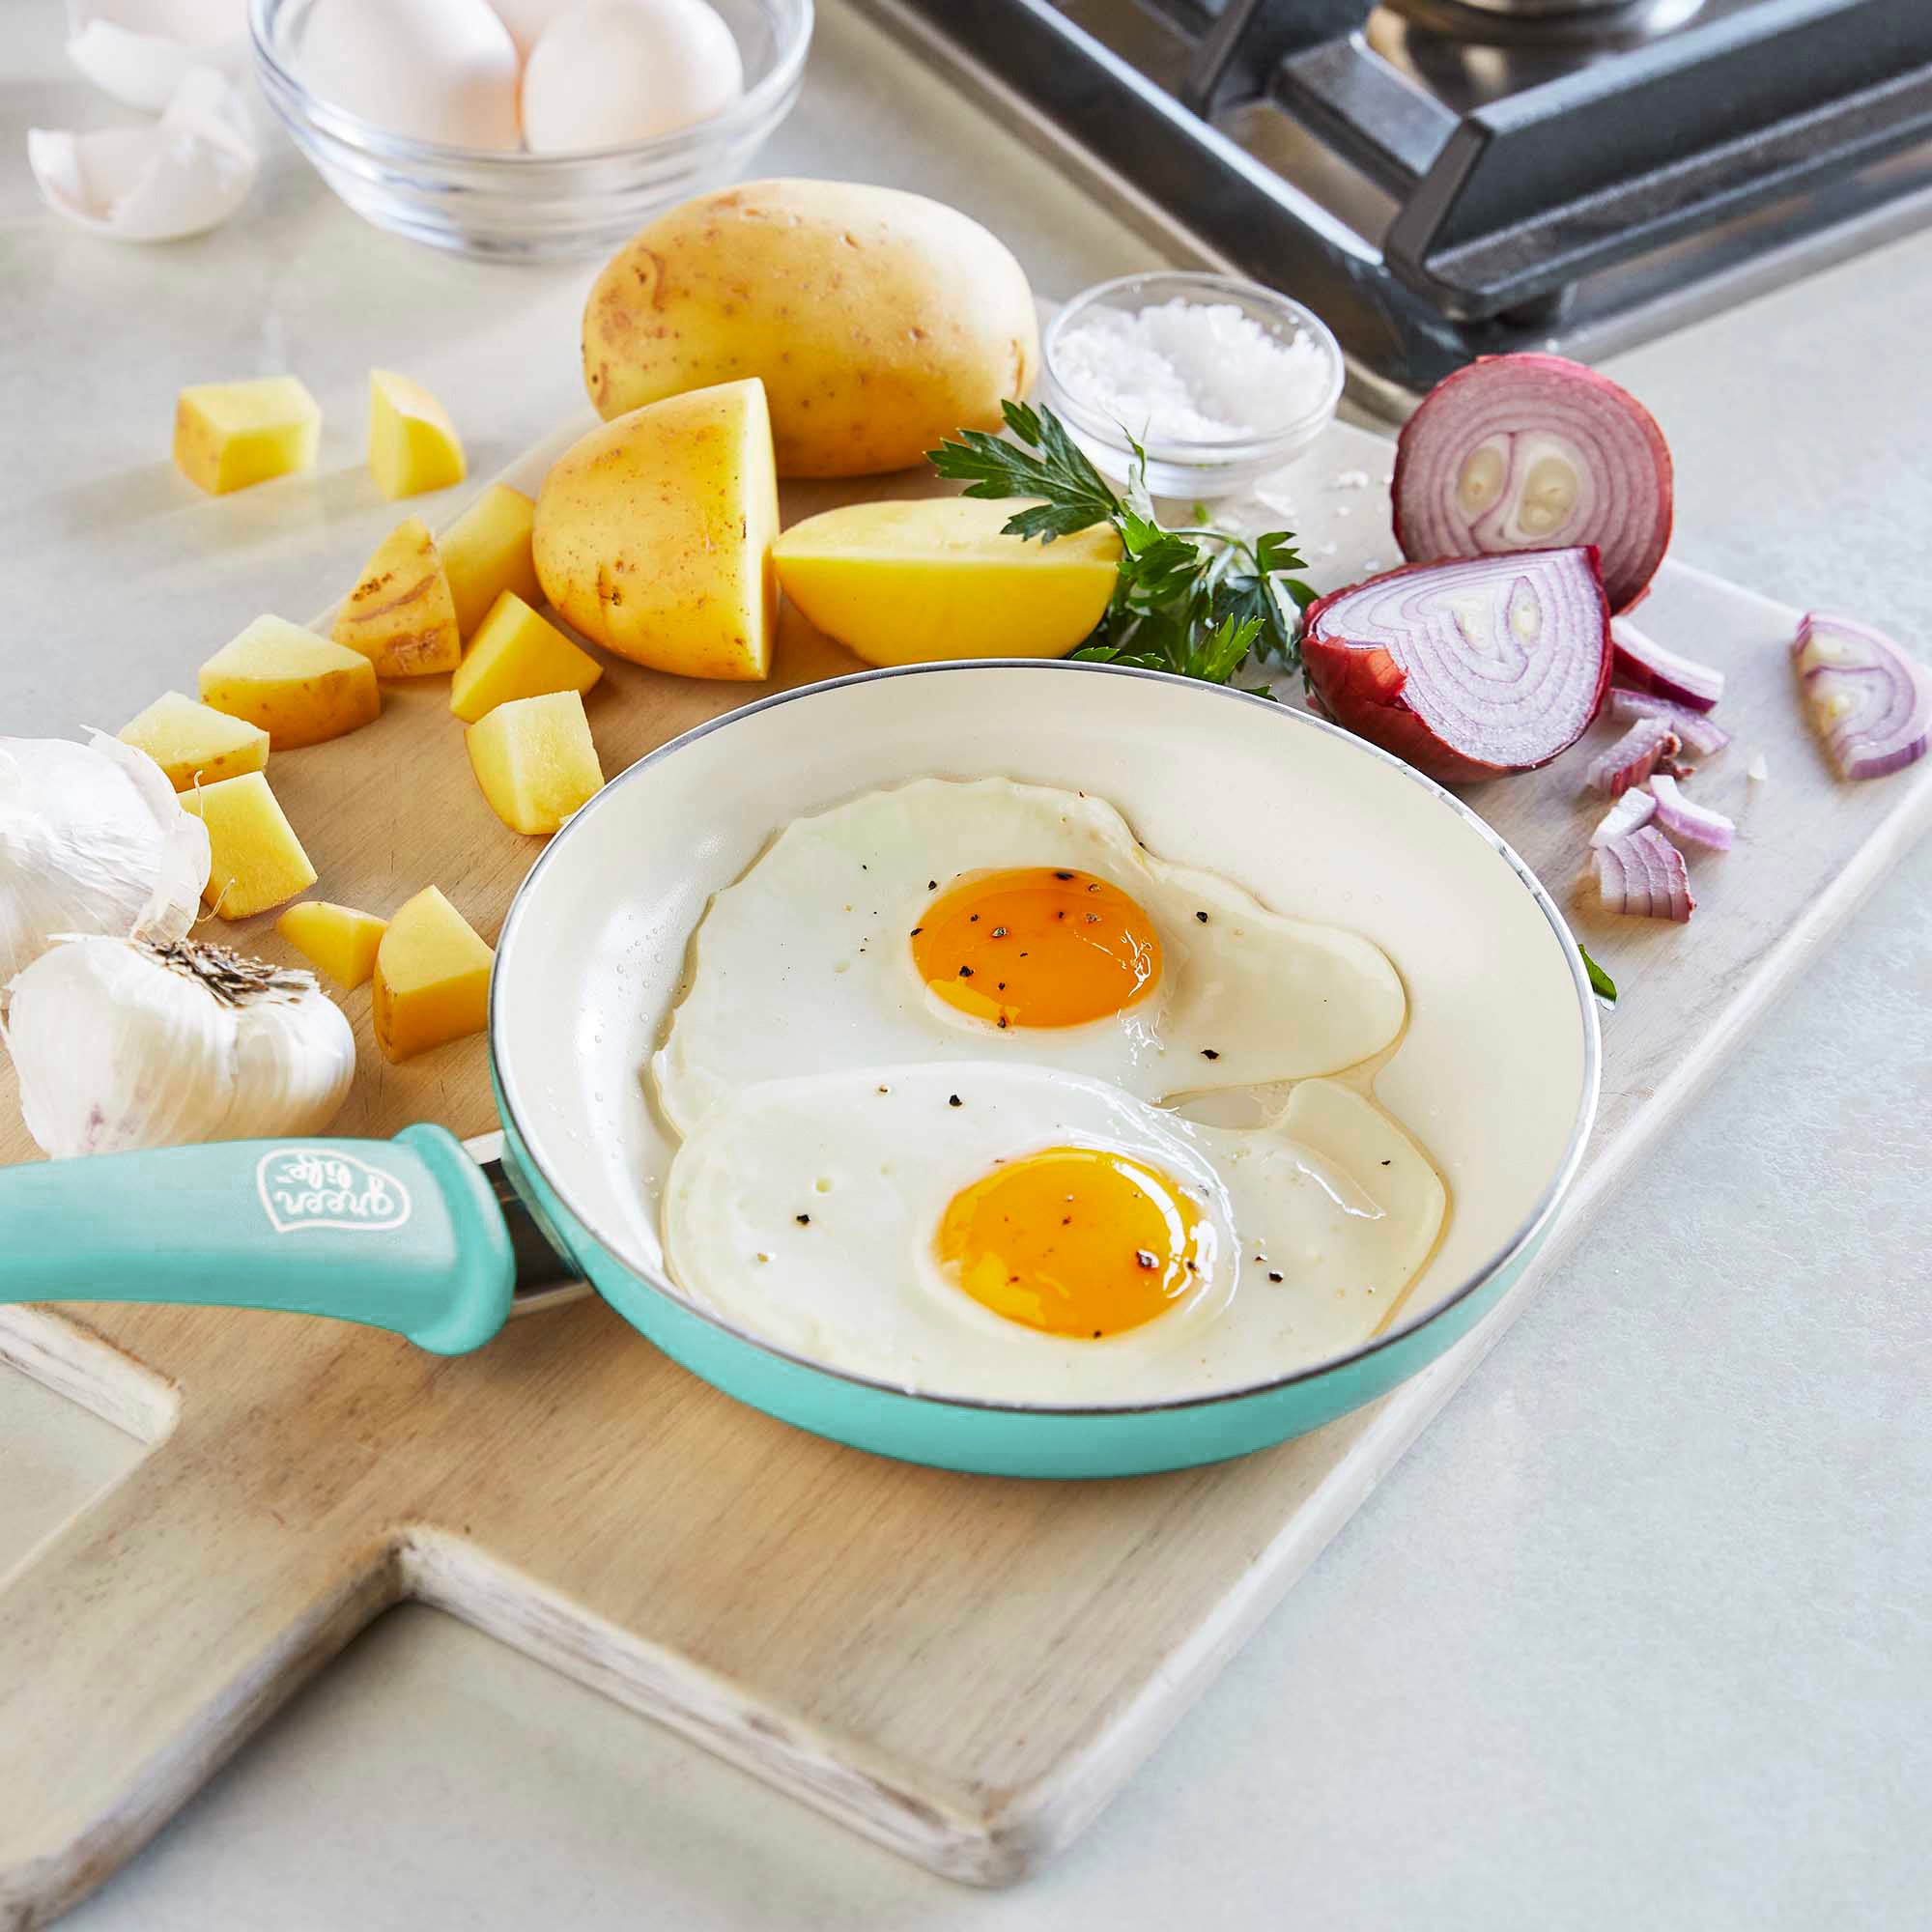 Pampered Chef Ceramic Egg Cooker | Microwave Egg Poacher | Quick Scrambled Eggs Maker | Silicone Sleeve for Easy Grip and Heat Protection | #1529